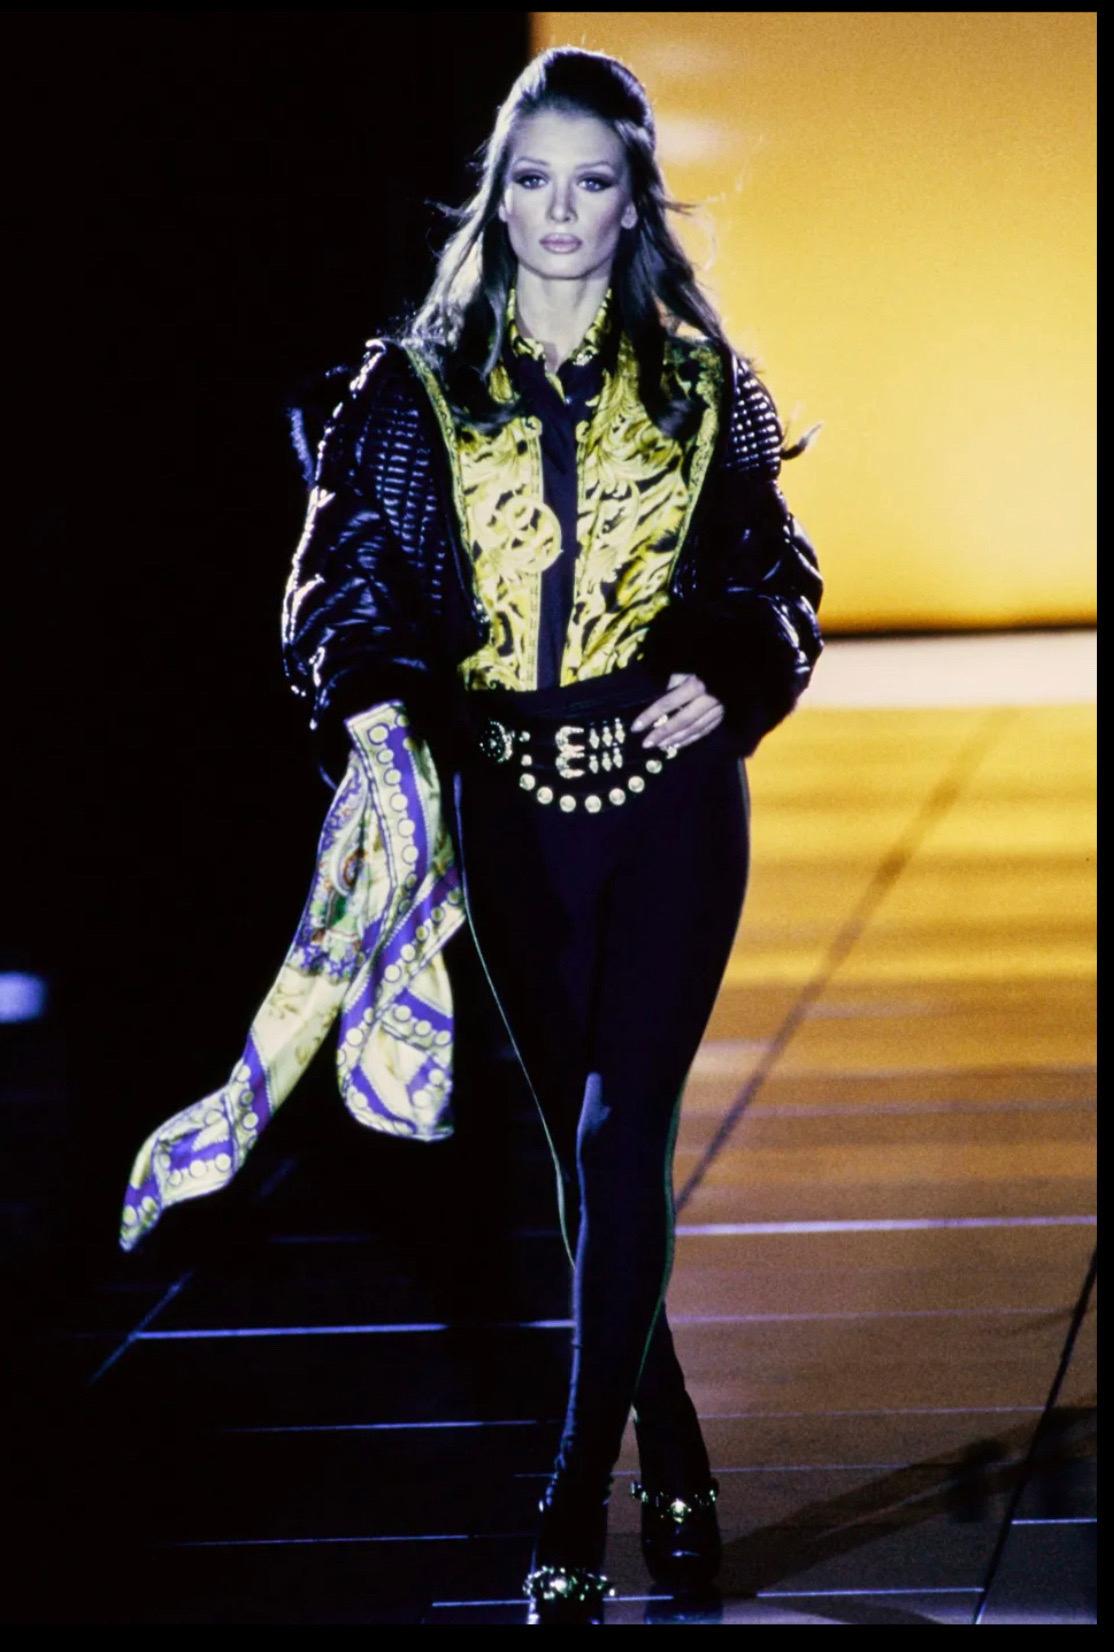 Extremely rare museum piece GIANNI VERSACE Runway Fall / Winter 1992 Bondage Collection leather, fox fur and astrakhan fur black runway jacket ! Angelina Kallio modeled this on the runway for Look # 46. Leather jacket is stuffed with down for